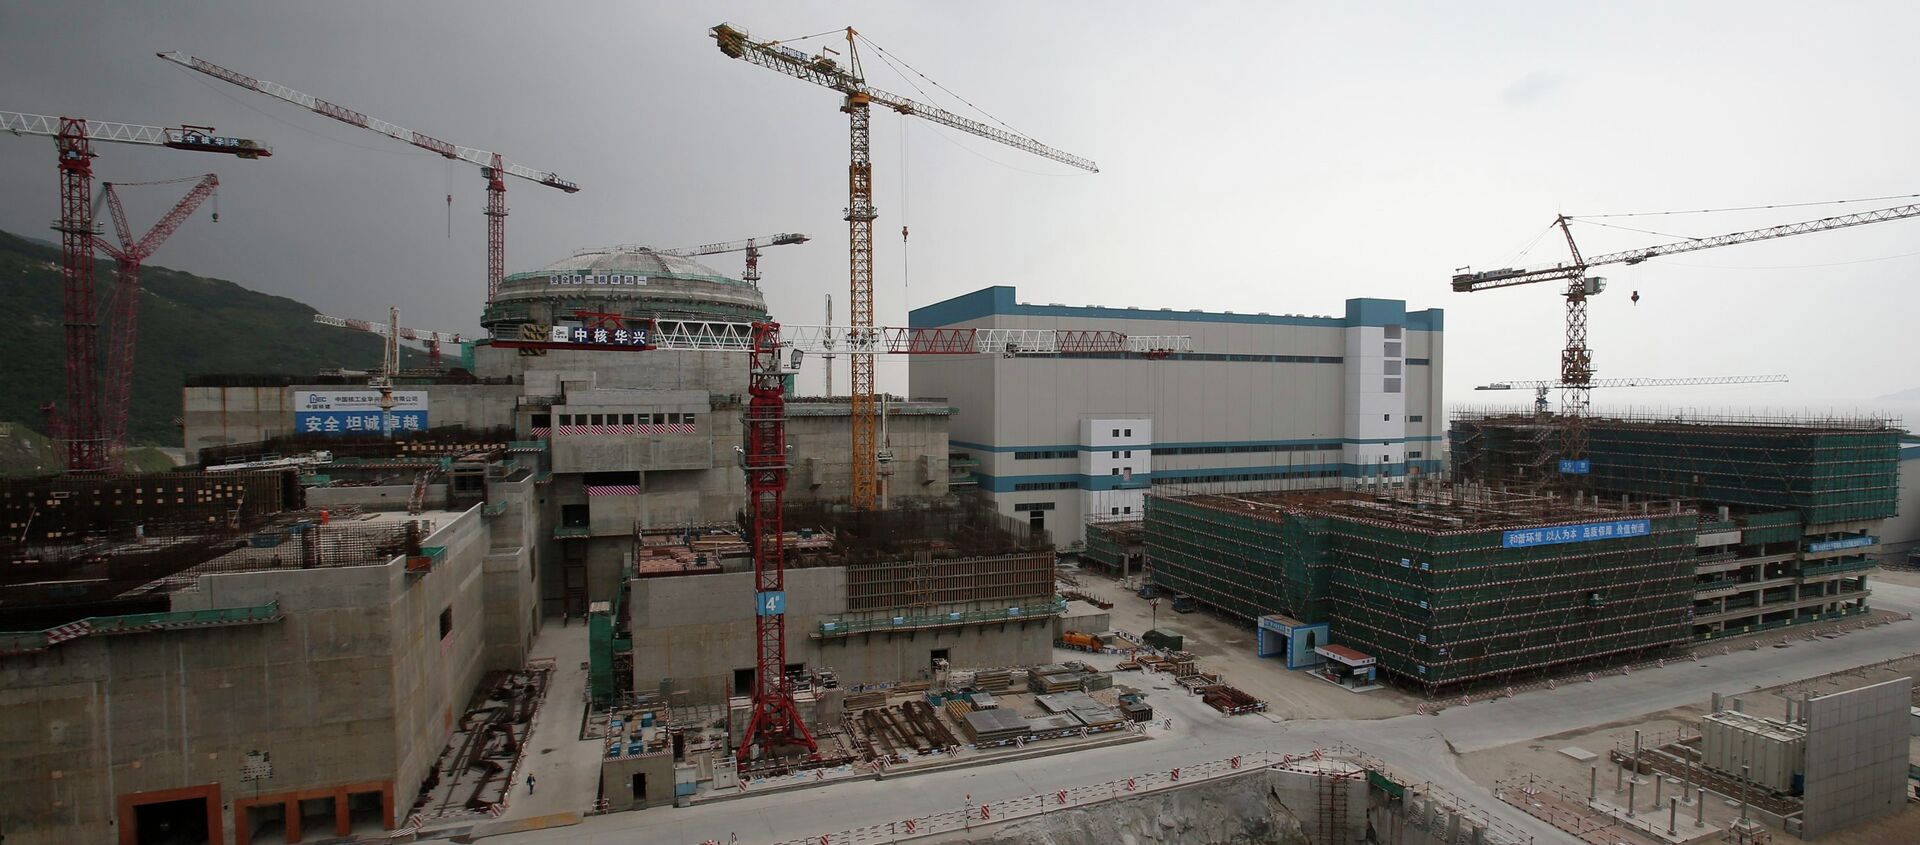 A nuclear reactor and related factilities as part of the Taishan Nuclear Power Plant, to be operated by China Guangdong Nuclear Power (CGN), is seen under construction in Taishan, Guangdong province - Sputnik International, 1920, 29.08.2019